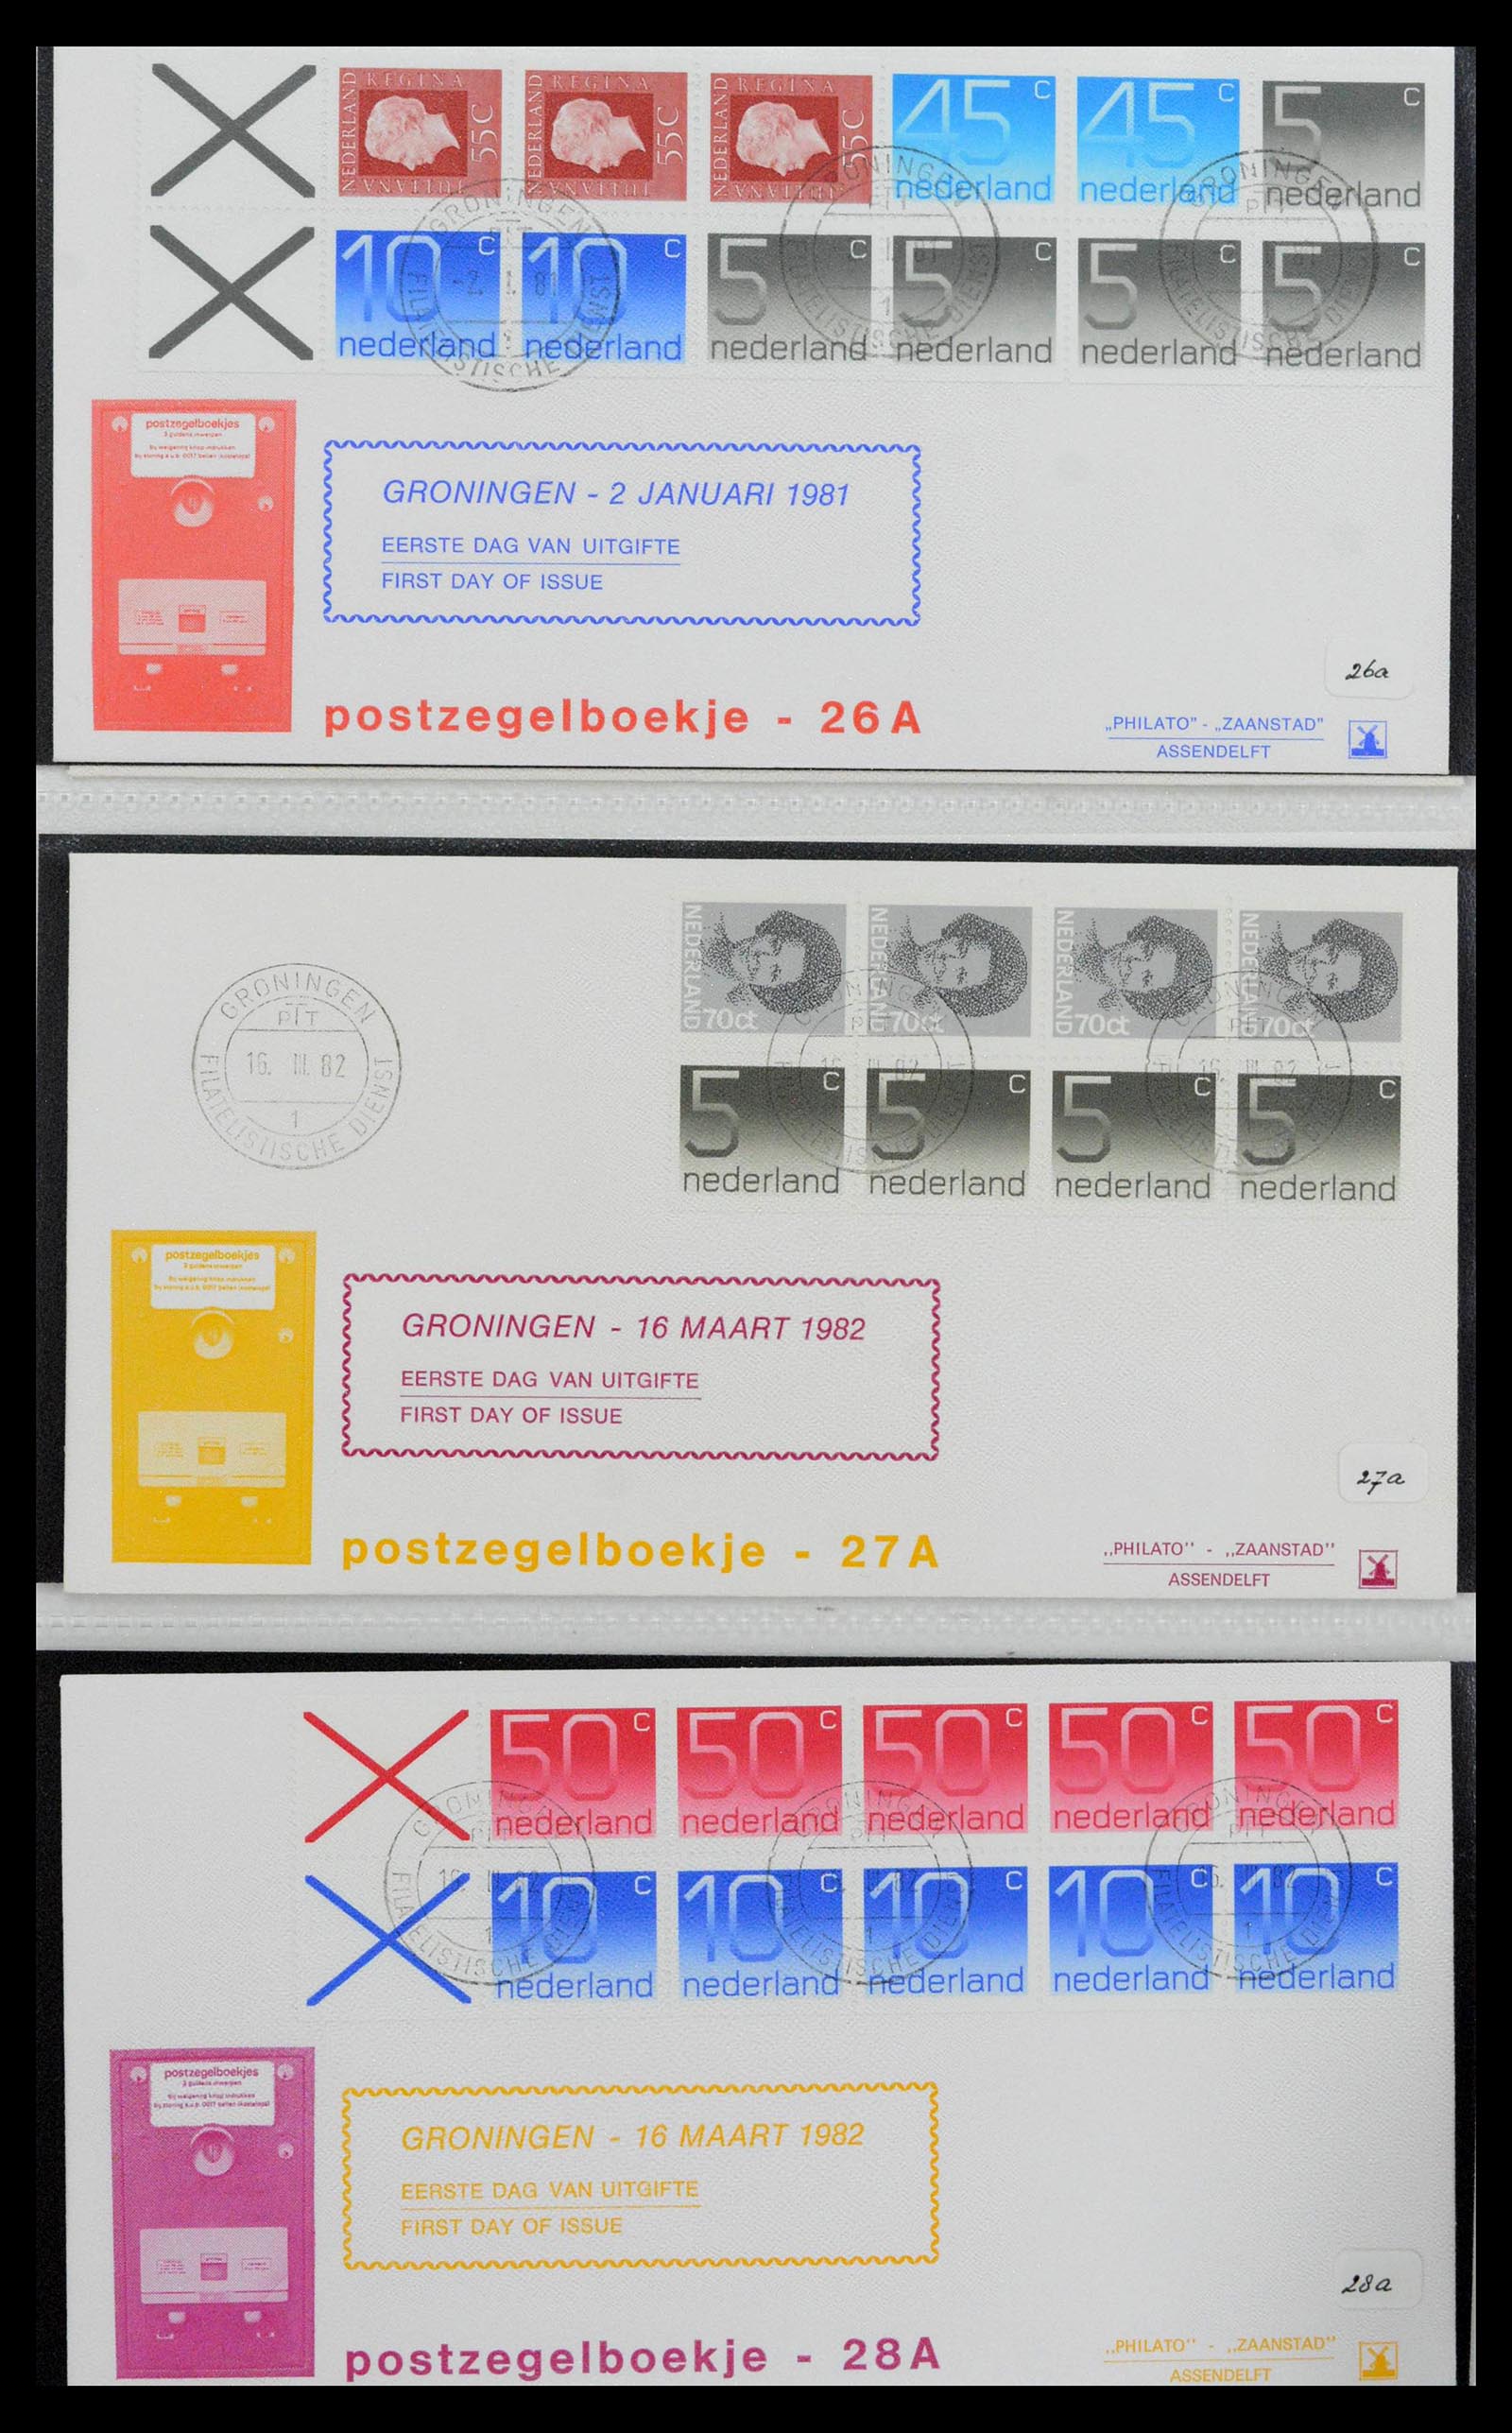 38559 0073 - Stamp collection 38559 Netherlands special first day covers.